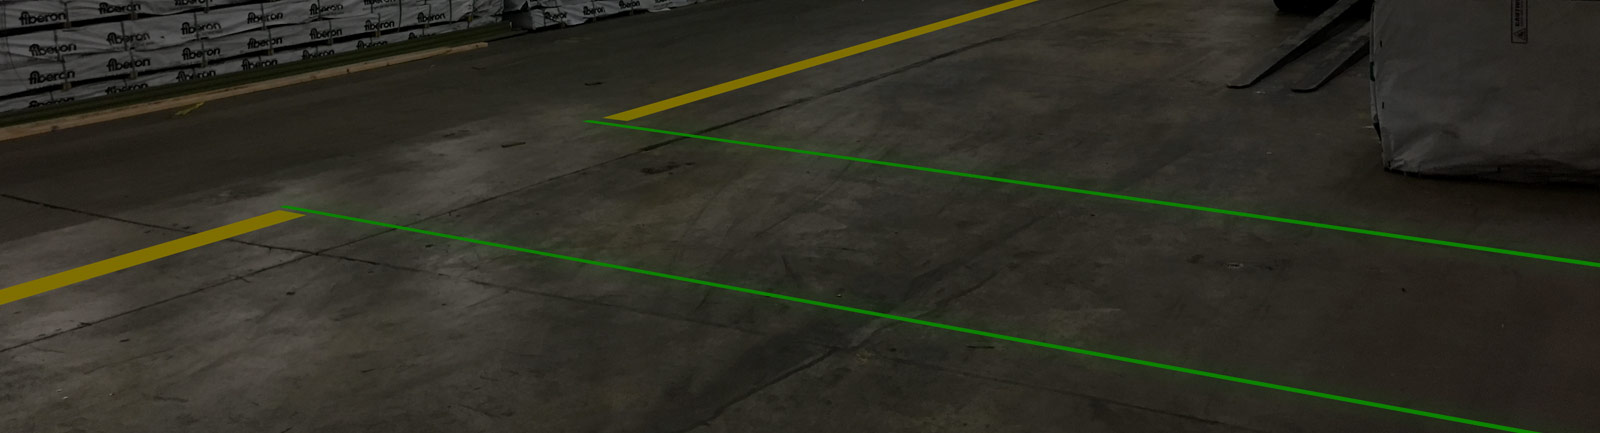 Laser Line On Floor And Wall Stock Photo - Download Image Now